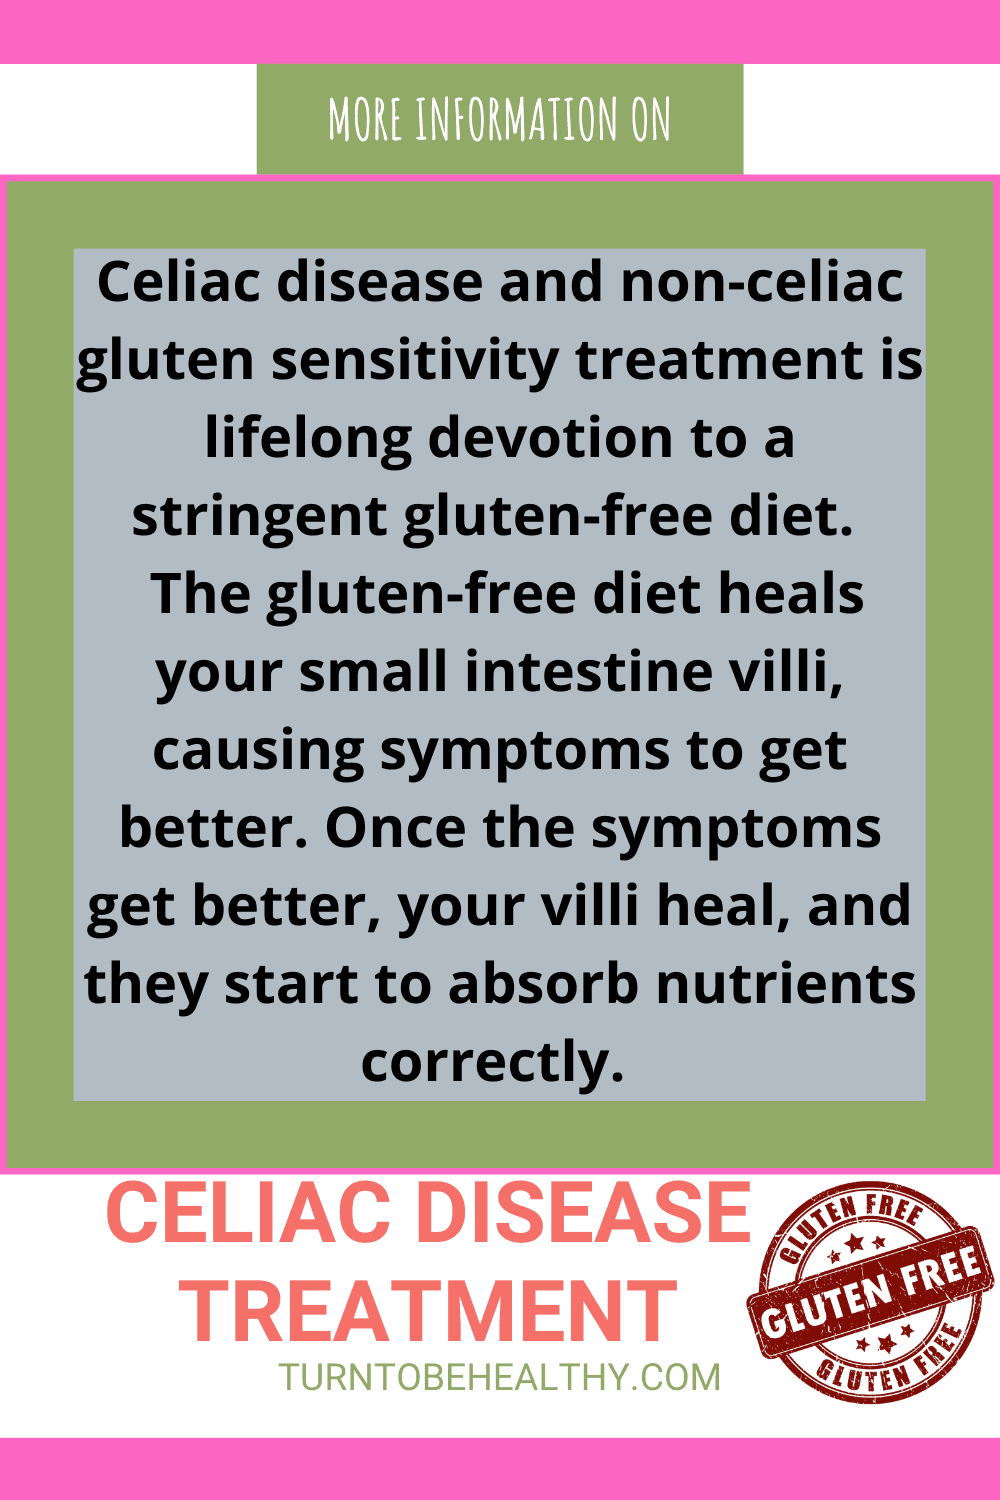 Complications of Celiac Disease - Causes, Interesting Facts, Skin and weird Symptoms of Celiac Disease. Untreated celiac disease can cause many different symptoms and complications. We will look more in-depth at the complications of celiac disease, its symptoms, its causes, and interesting facts about it. We will give you also interesting facts about celiac disease.